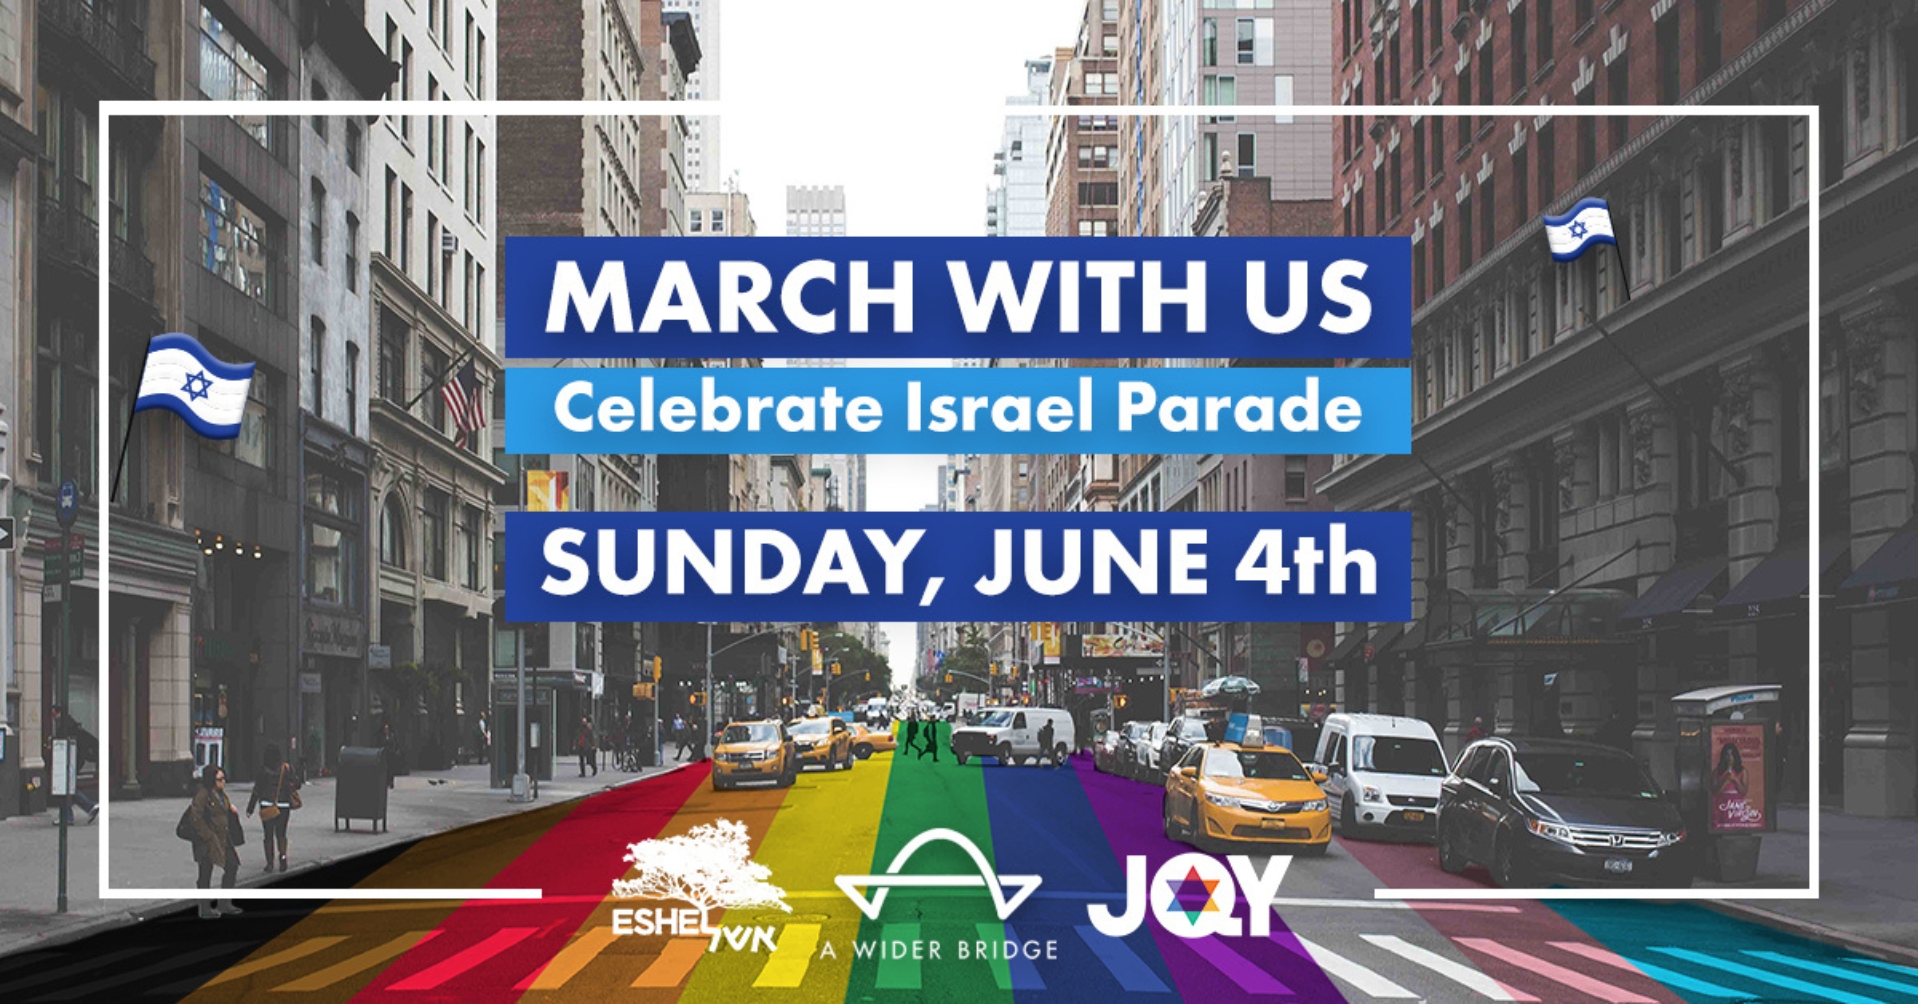 text: march with us. celebrate Israel parade. Sunday June 4. image: Israel flags, rainbow on city street and logos for Eshel, A Wider bridge, and JQY